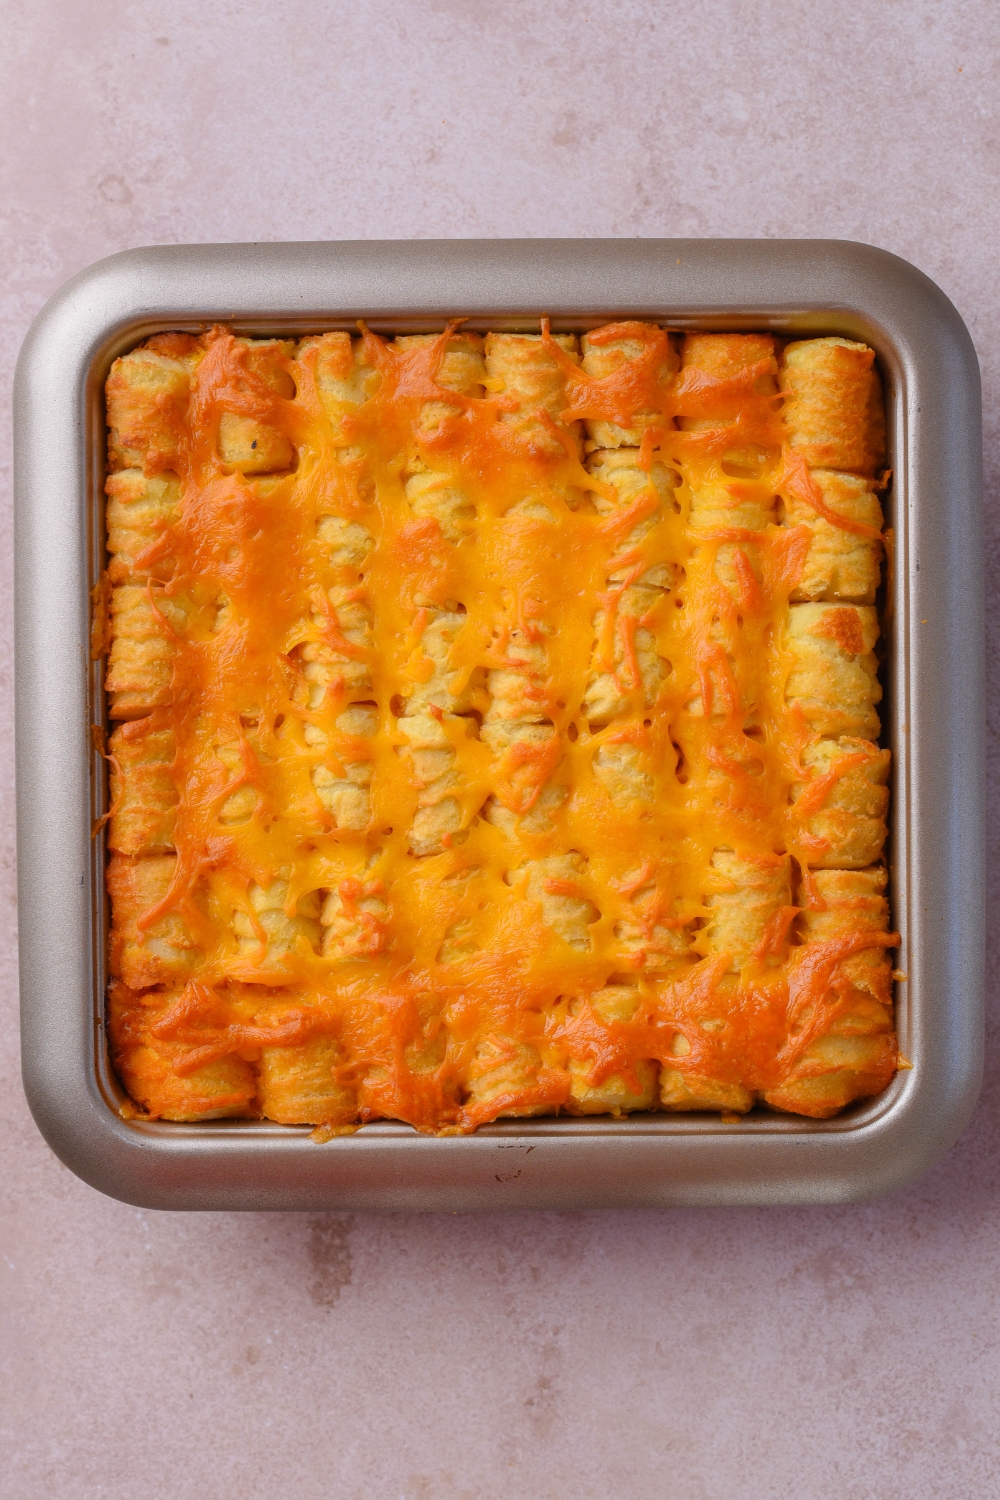 Melted cheese on top of tater tots layered in a square baking dish on a grey counter.